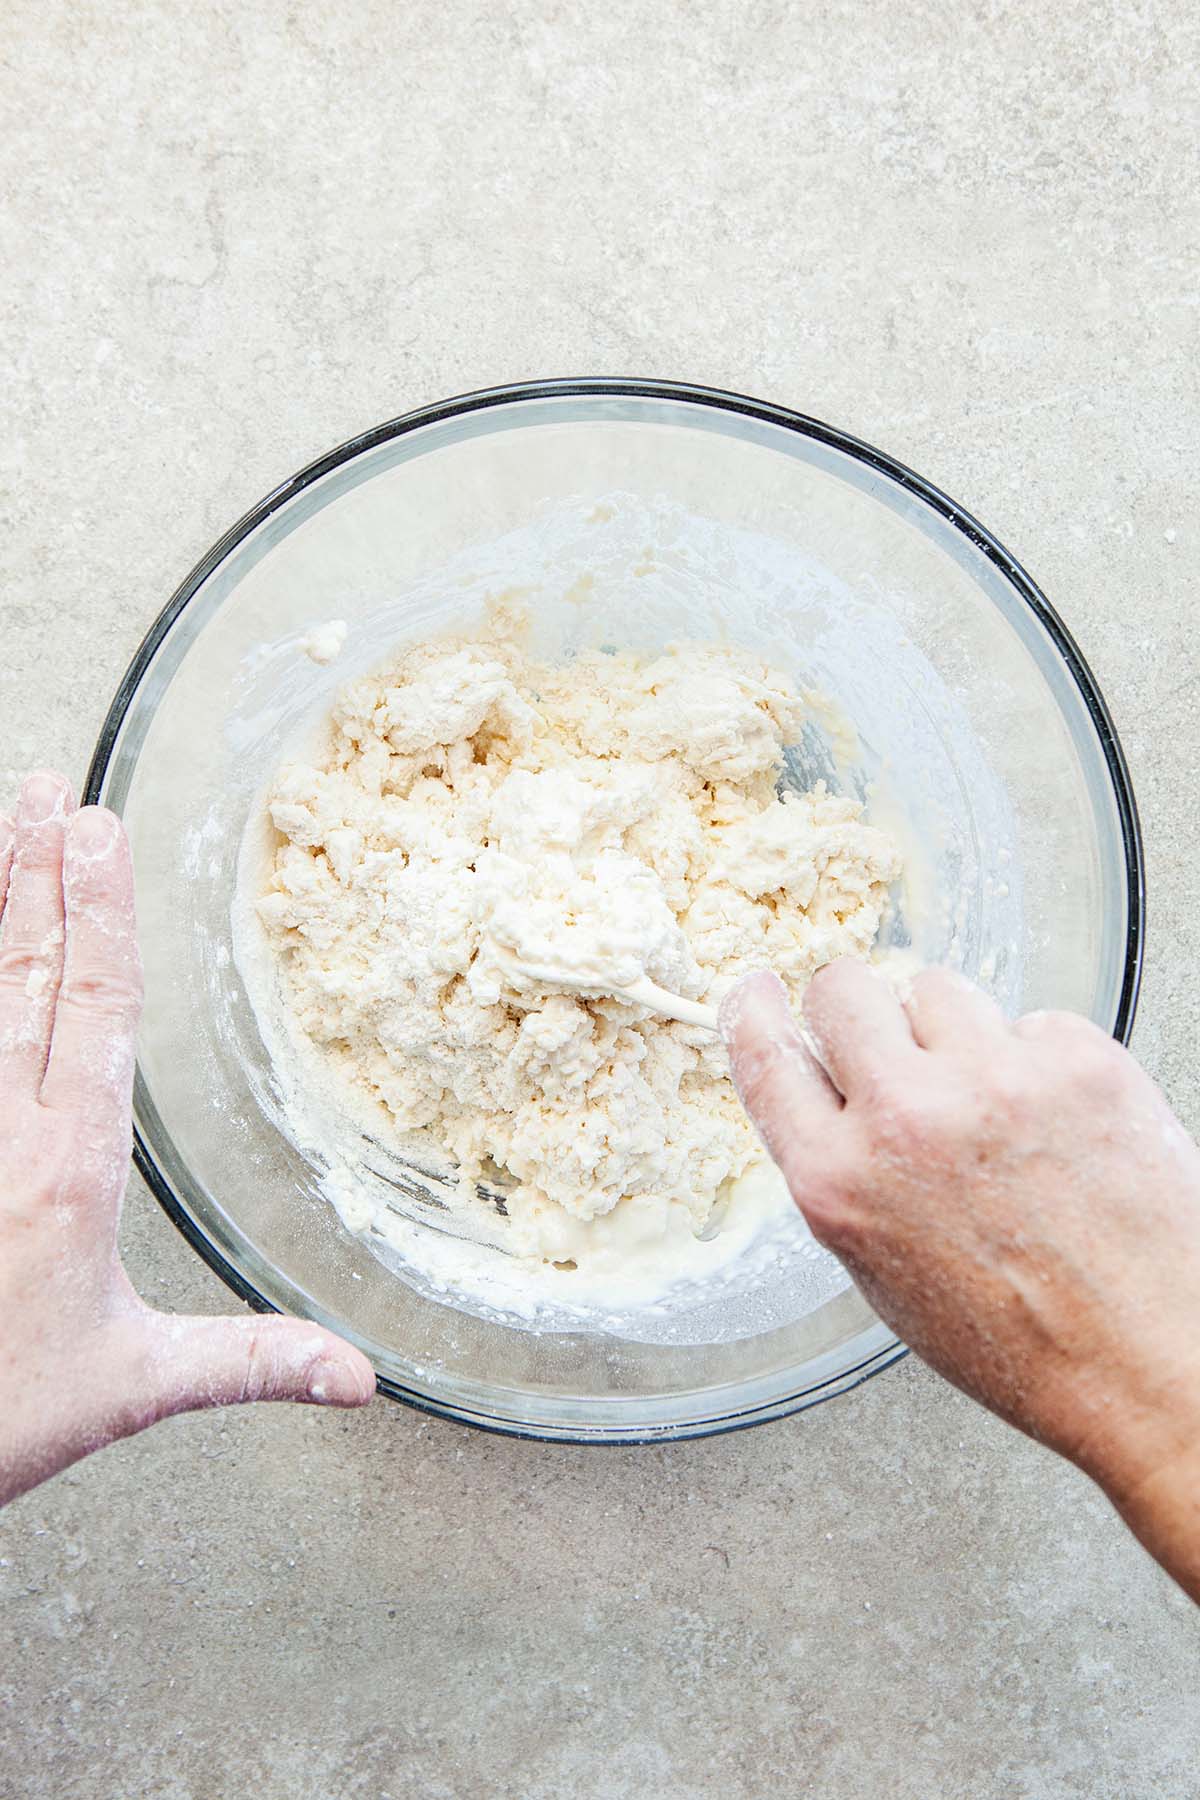 A hand mixing biscuit dough in a glass bowl with a fork.